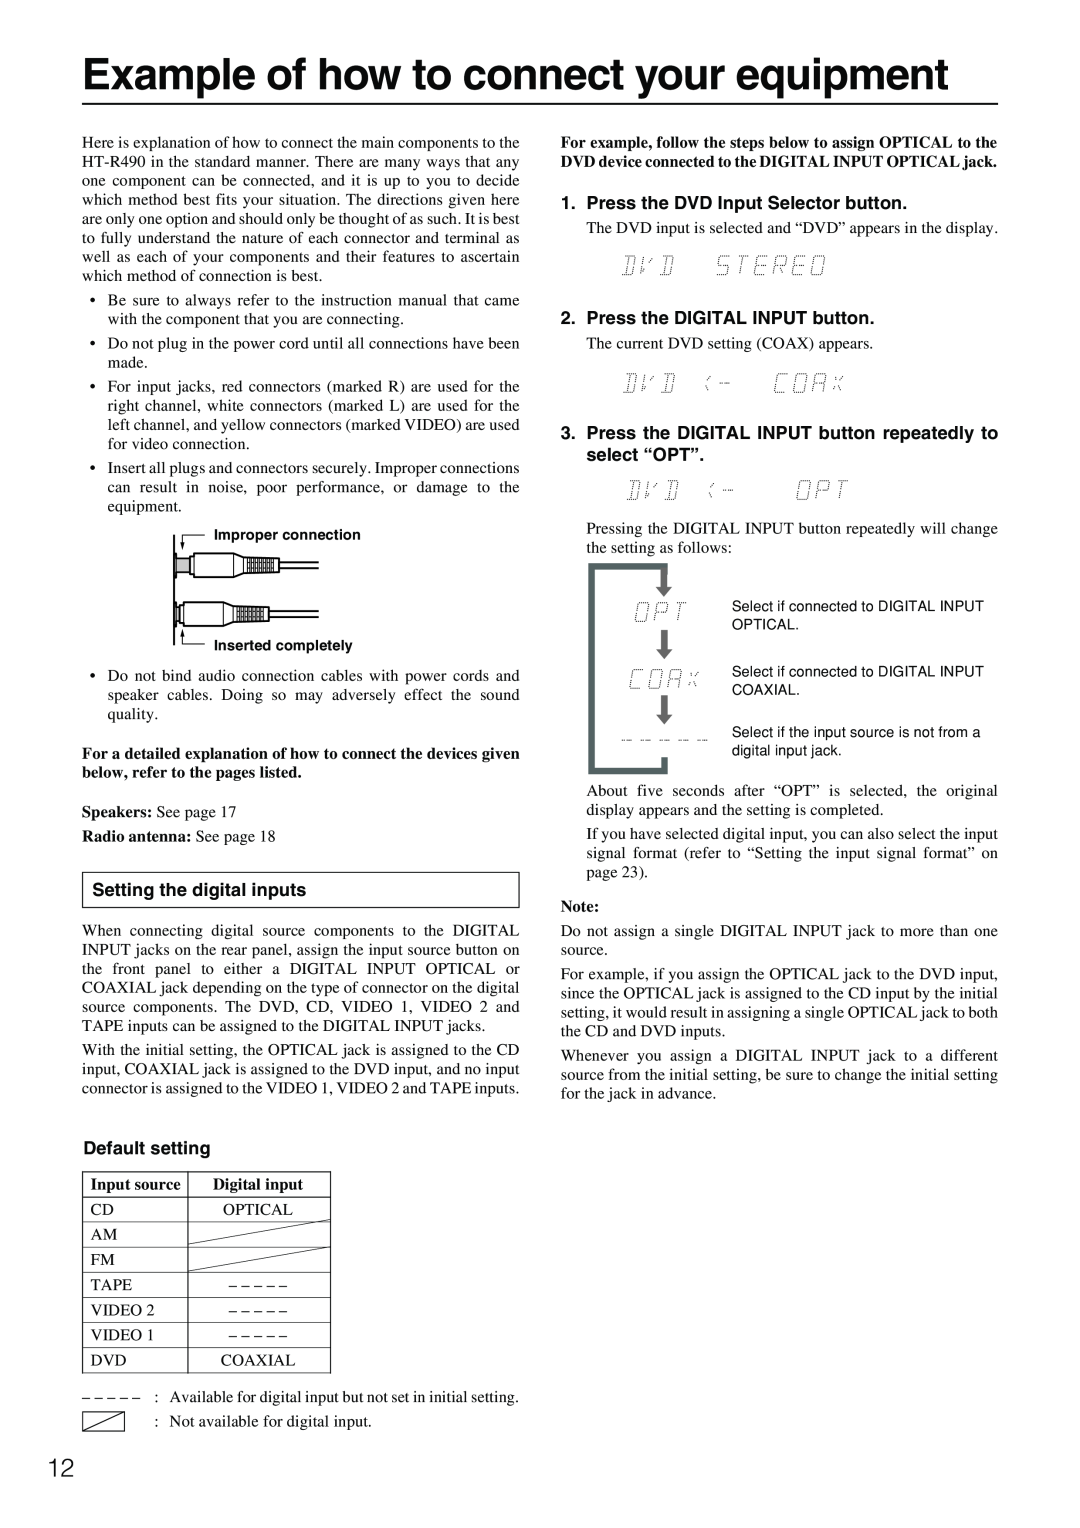 Onkyo HT-R490 appendix Example of how to connect your equipment, Setting the digital inputs, Default setting, Input source 